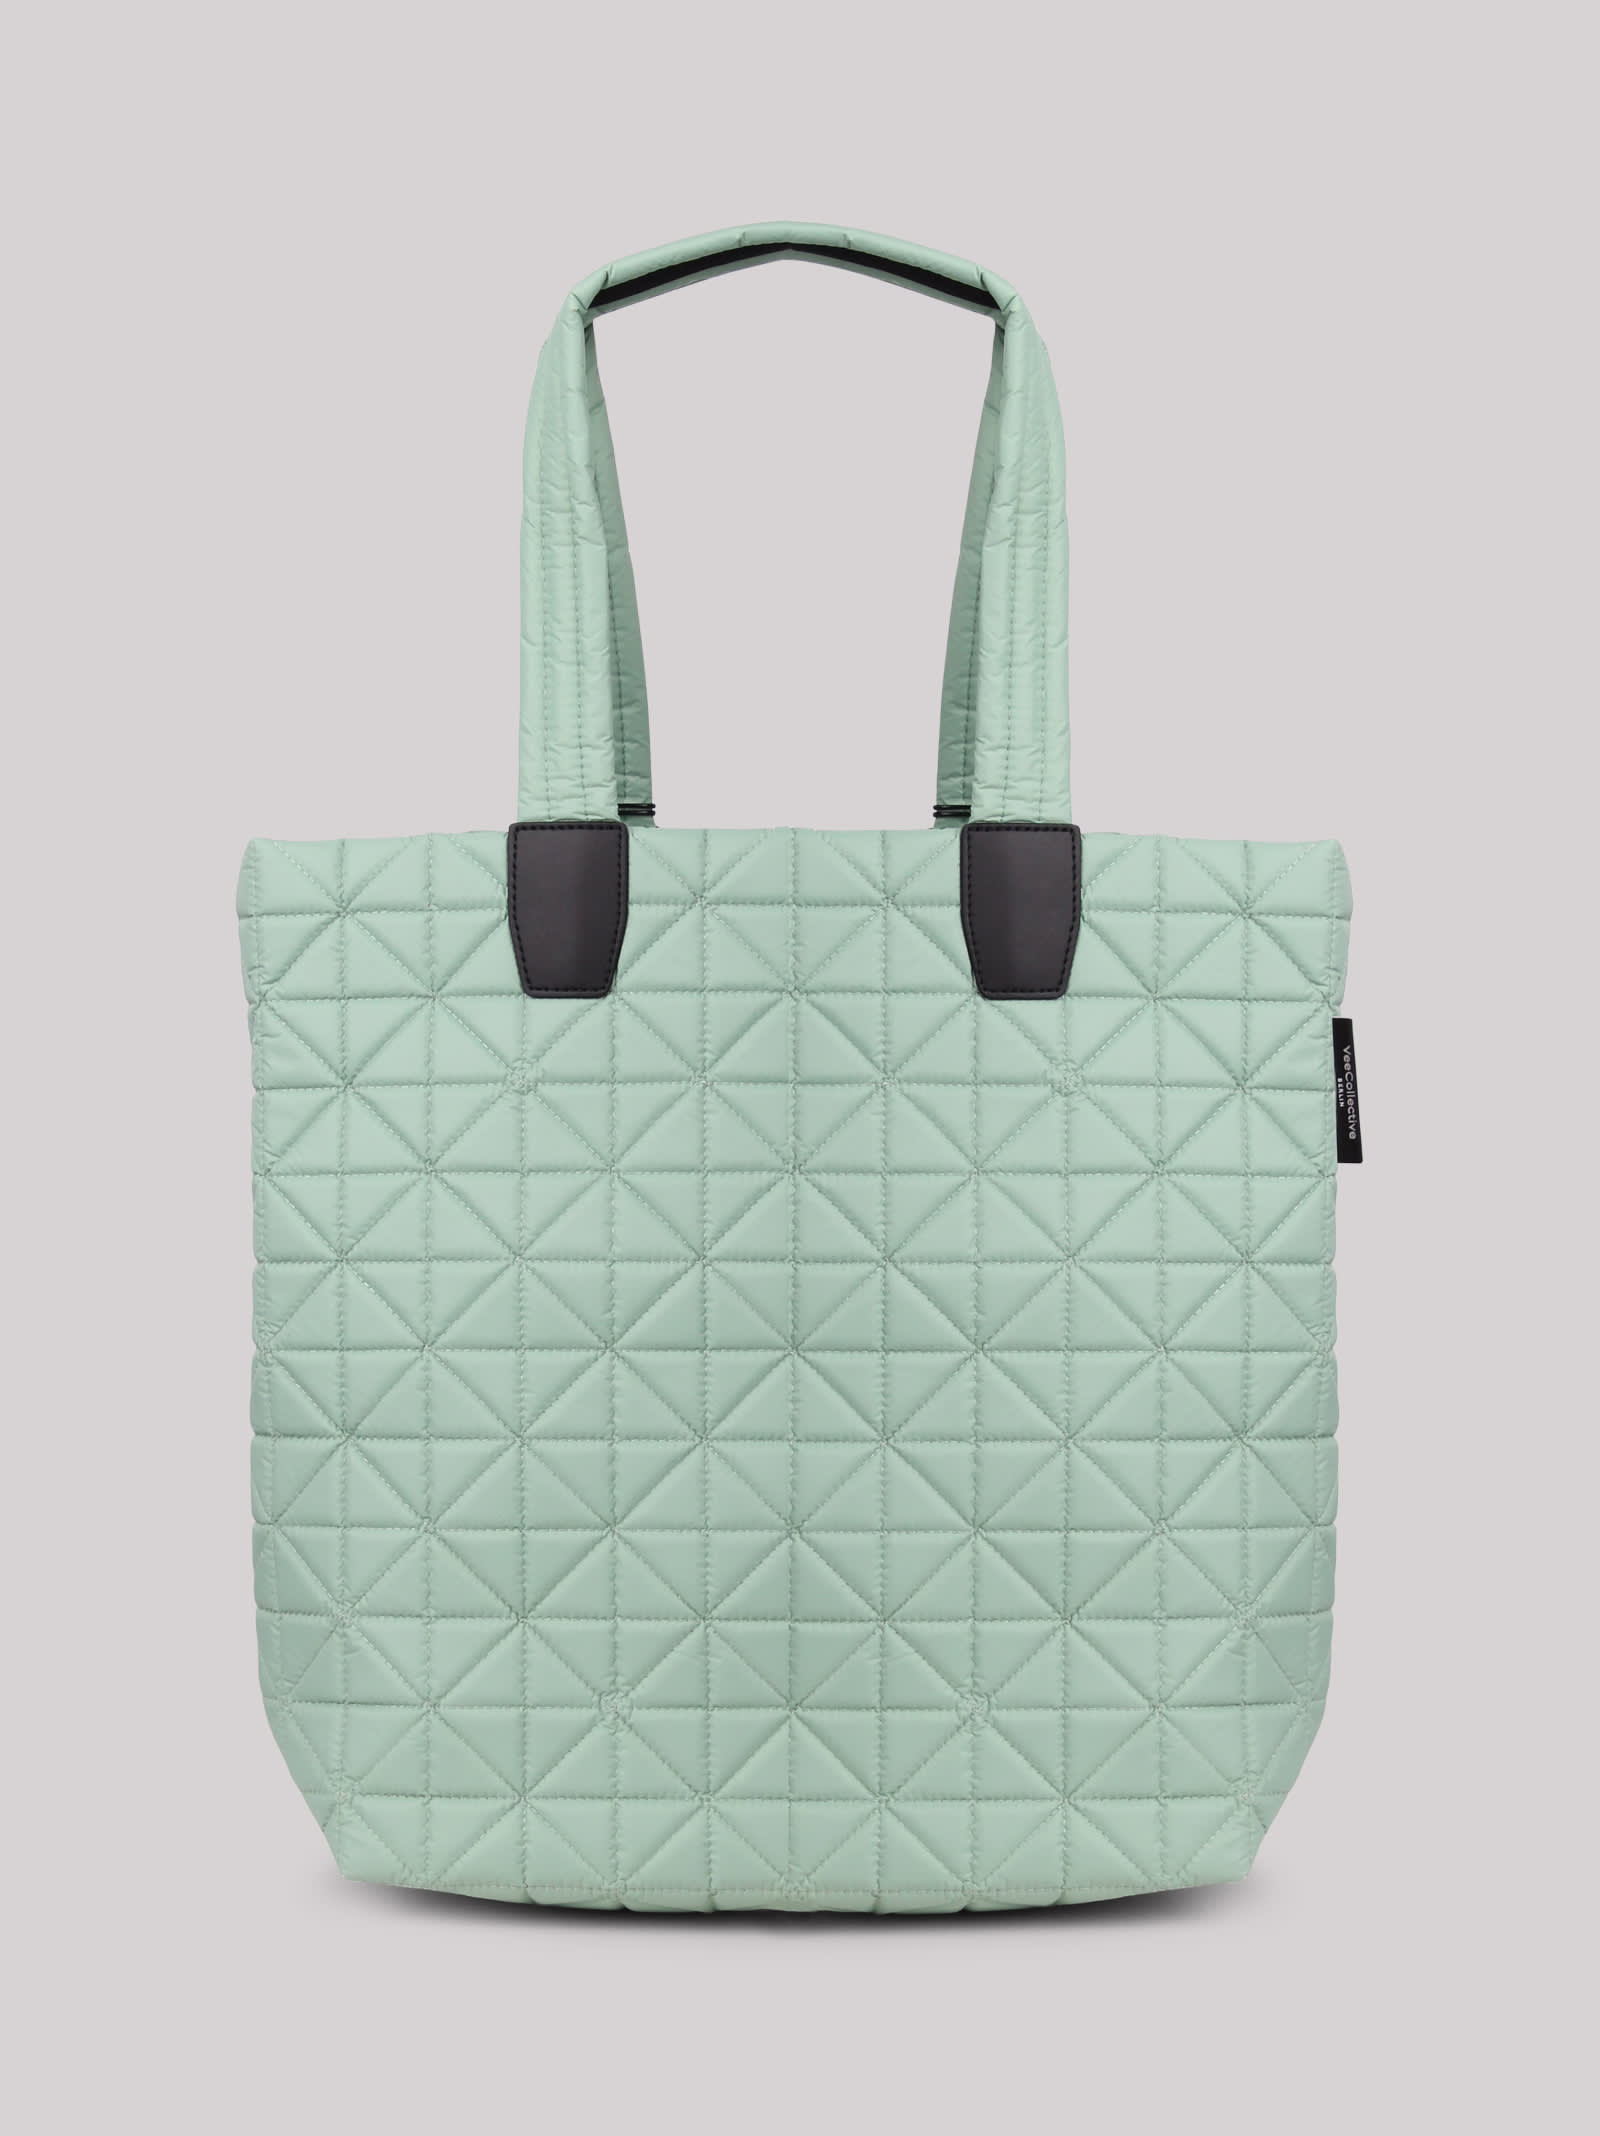 VEECOLLECTIVE VEE COLLECTIVE LARGE VEE GEOMETRIC TOTE BAG